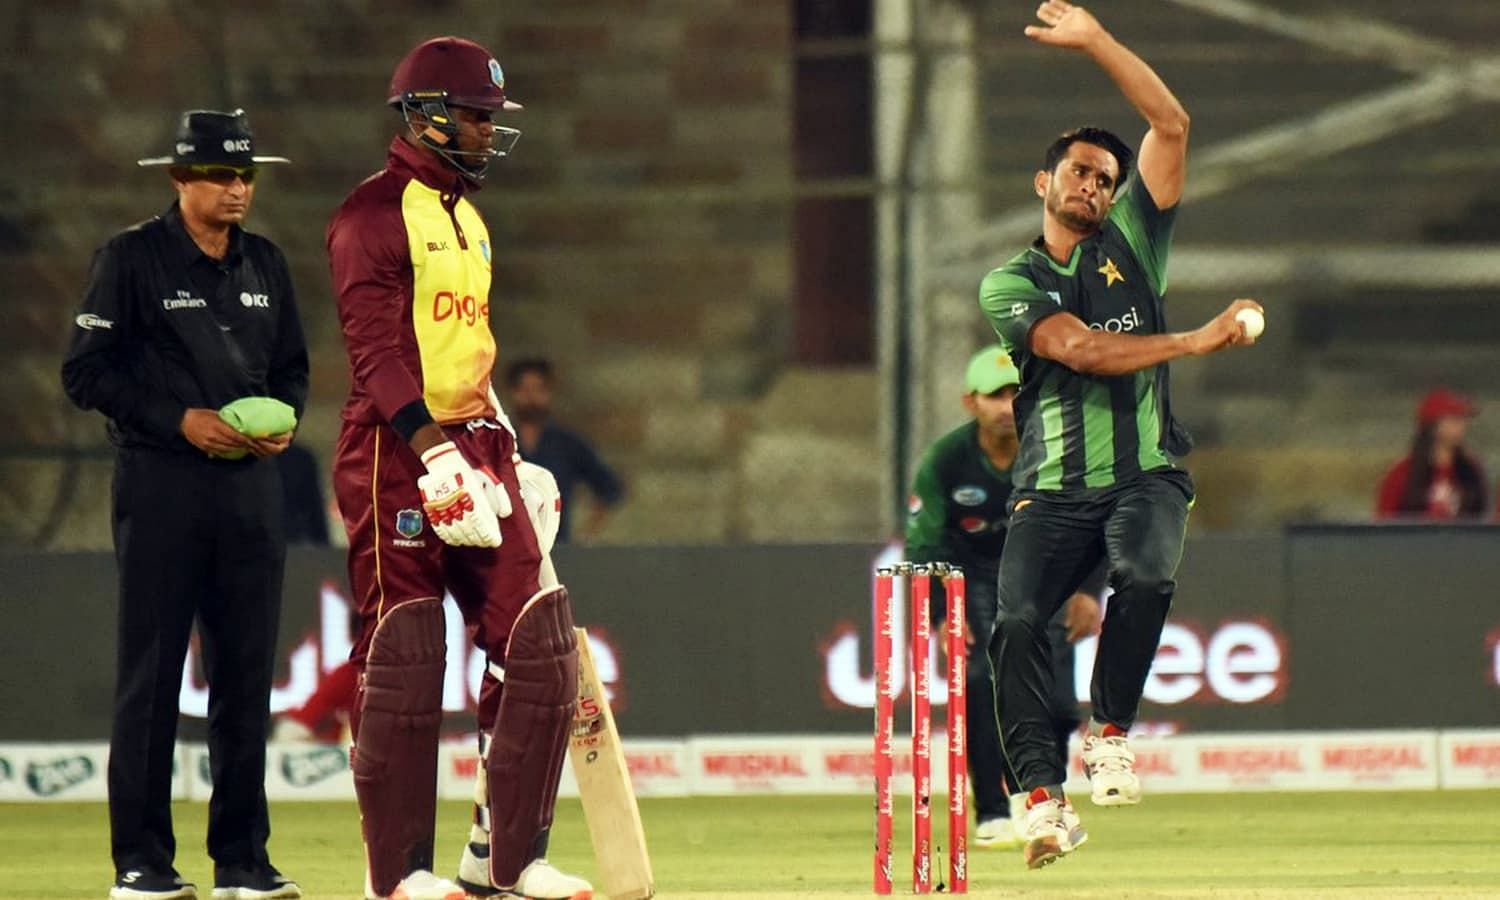 Pakistan thumped a star studded West Indies line-up by 143 runs